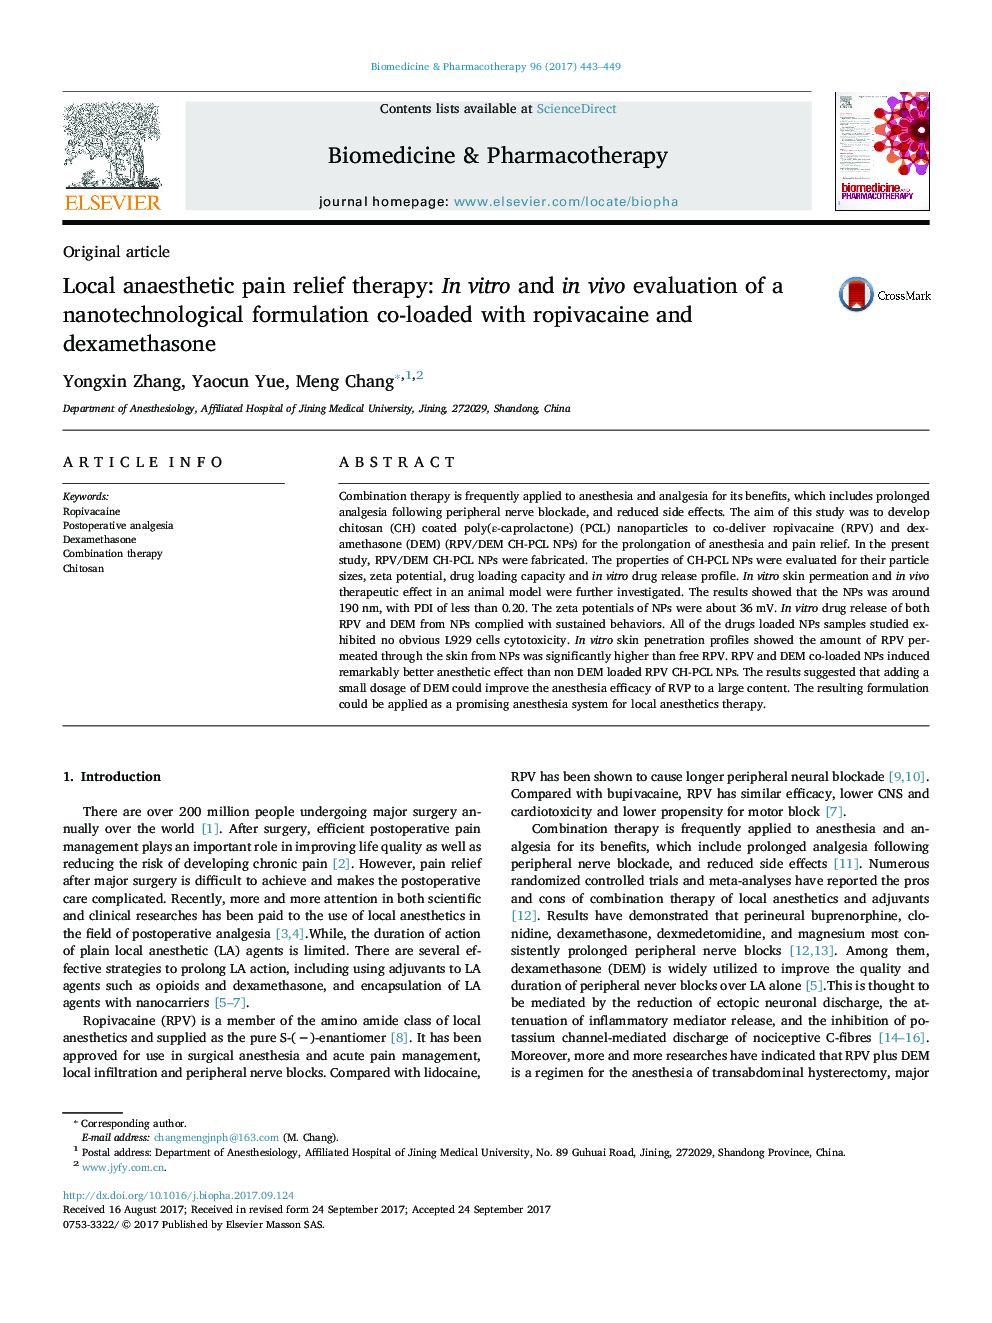 Local anaesthetic pain relief therapy: In vitro and in vivo evaluation of a nanotechnological formulation co-loaded with ropivacaine and dexamethasone